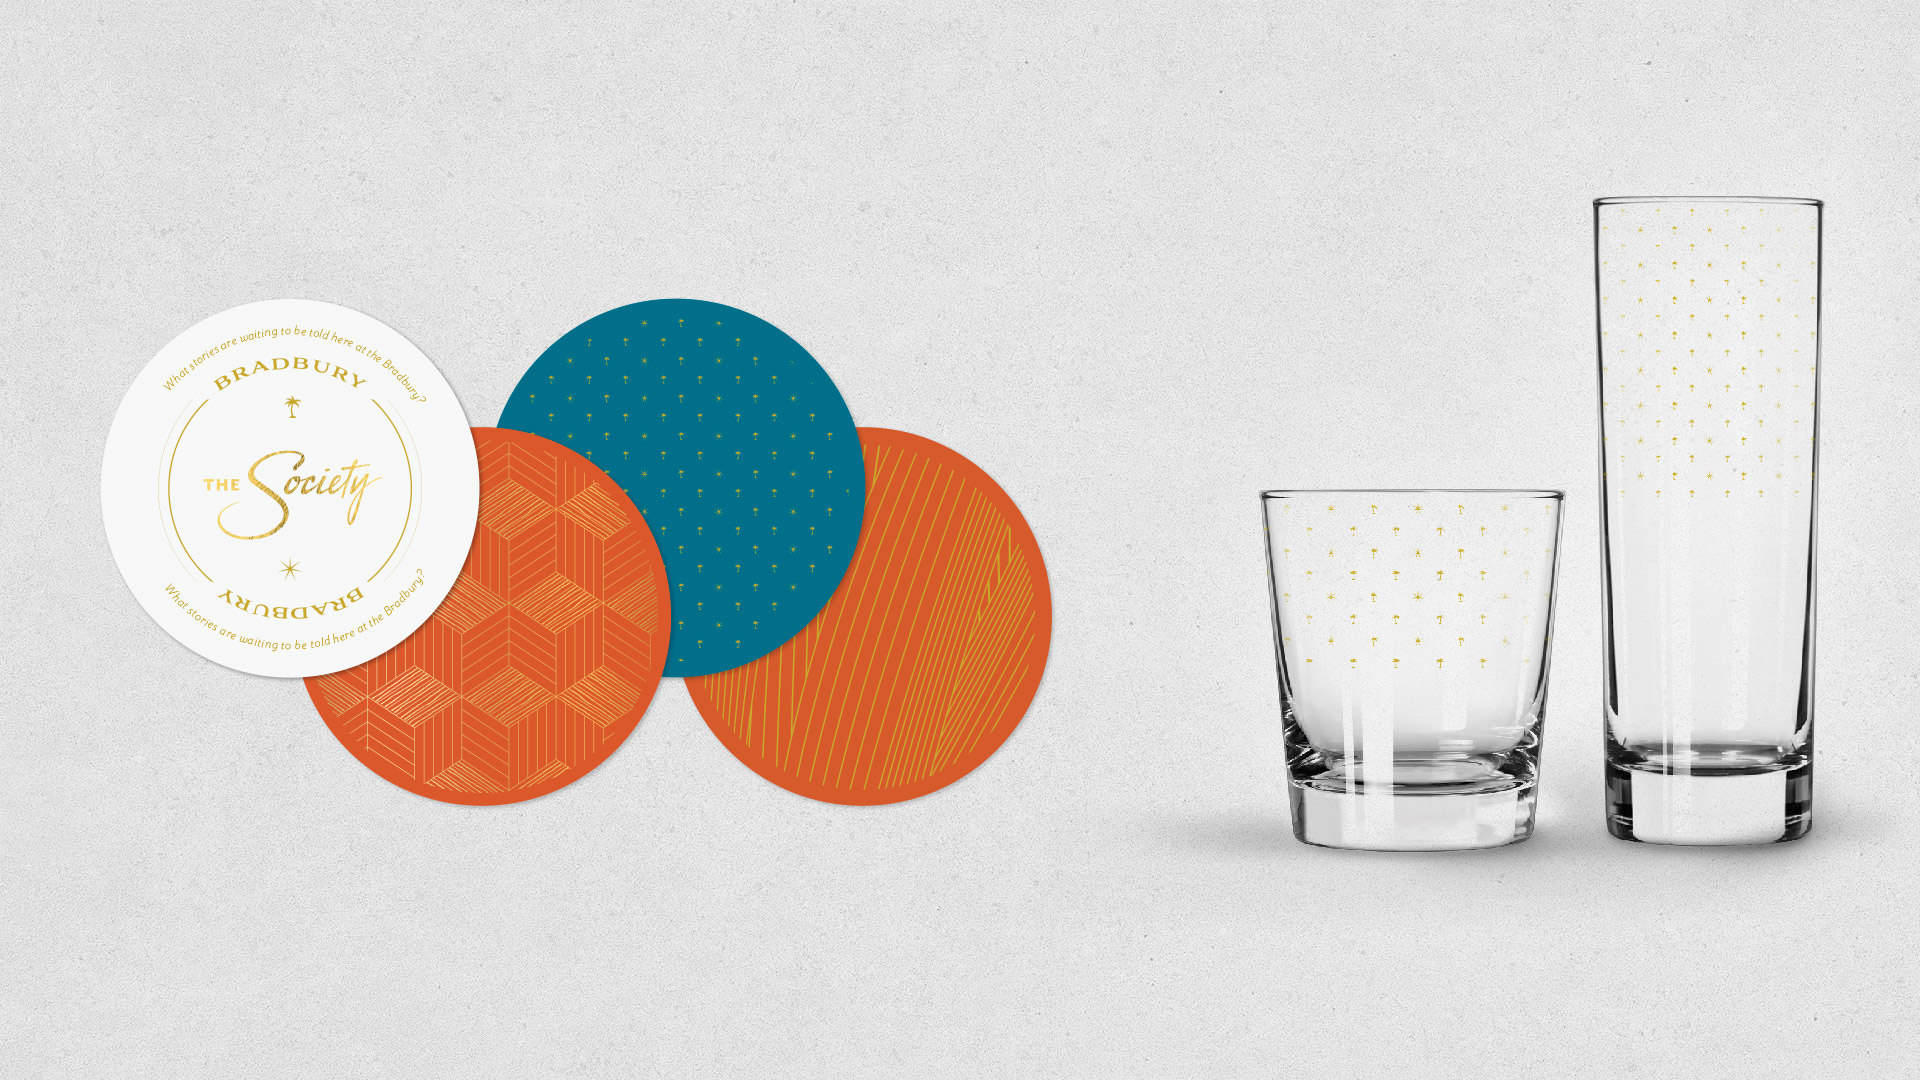 The Society apartments branding glassware mockup created by Incubate Design for Holland Residential